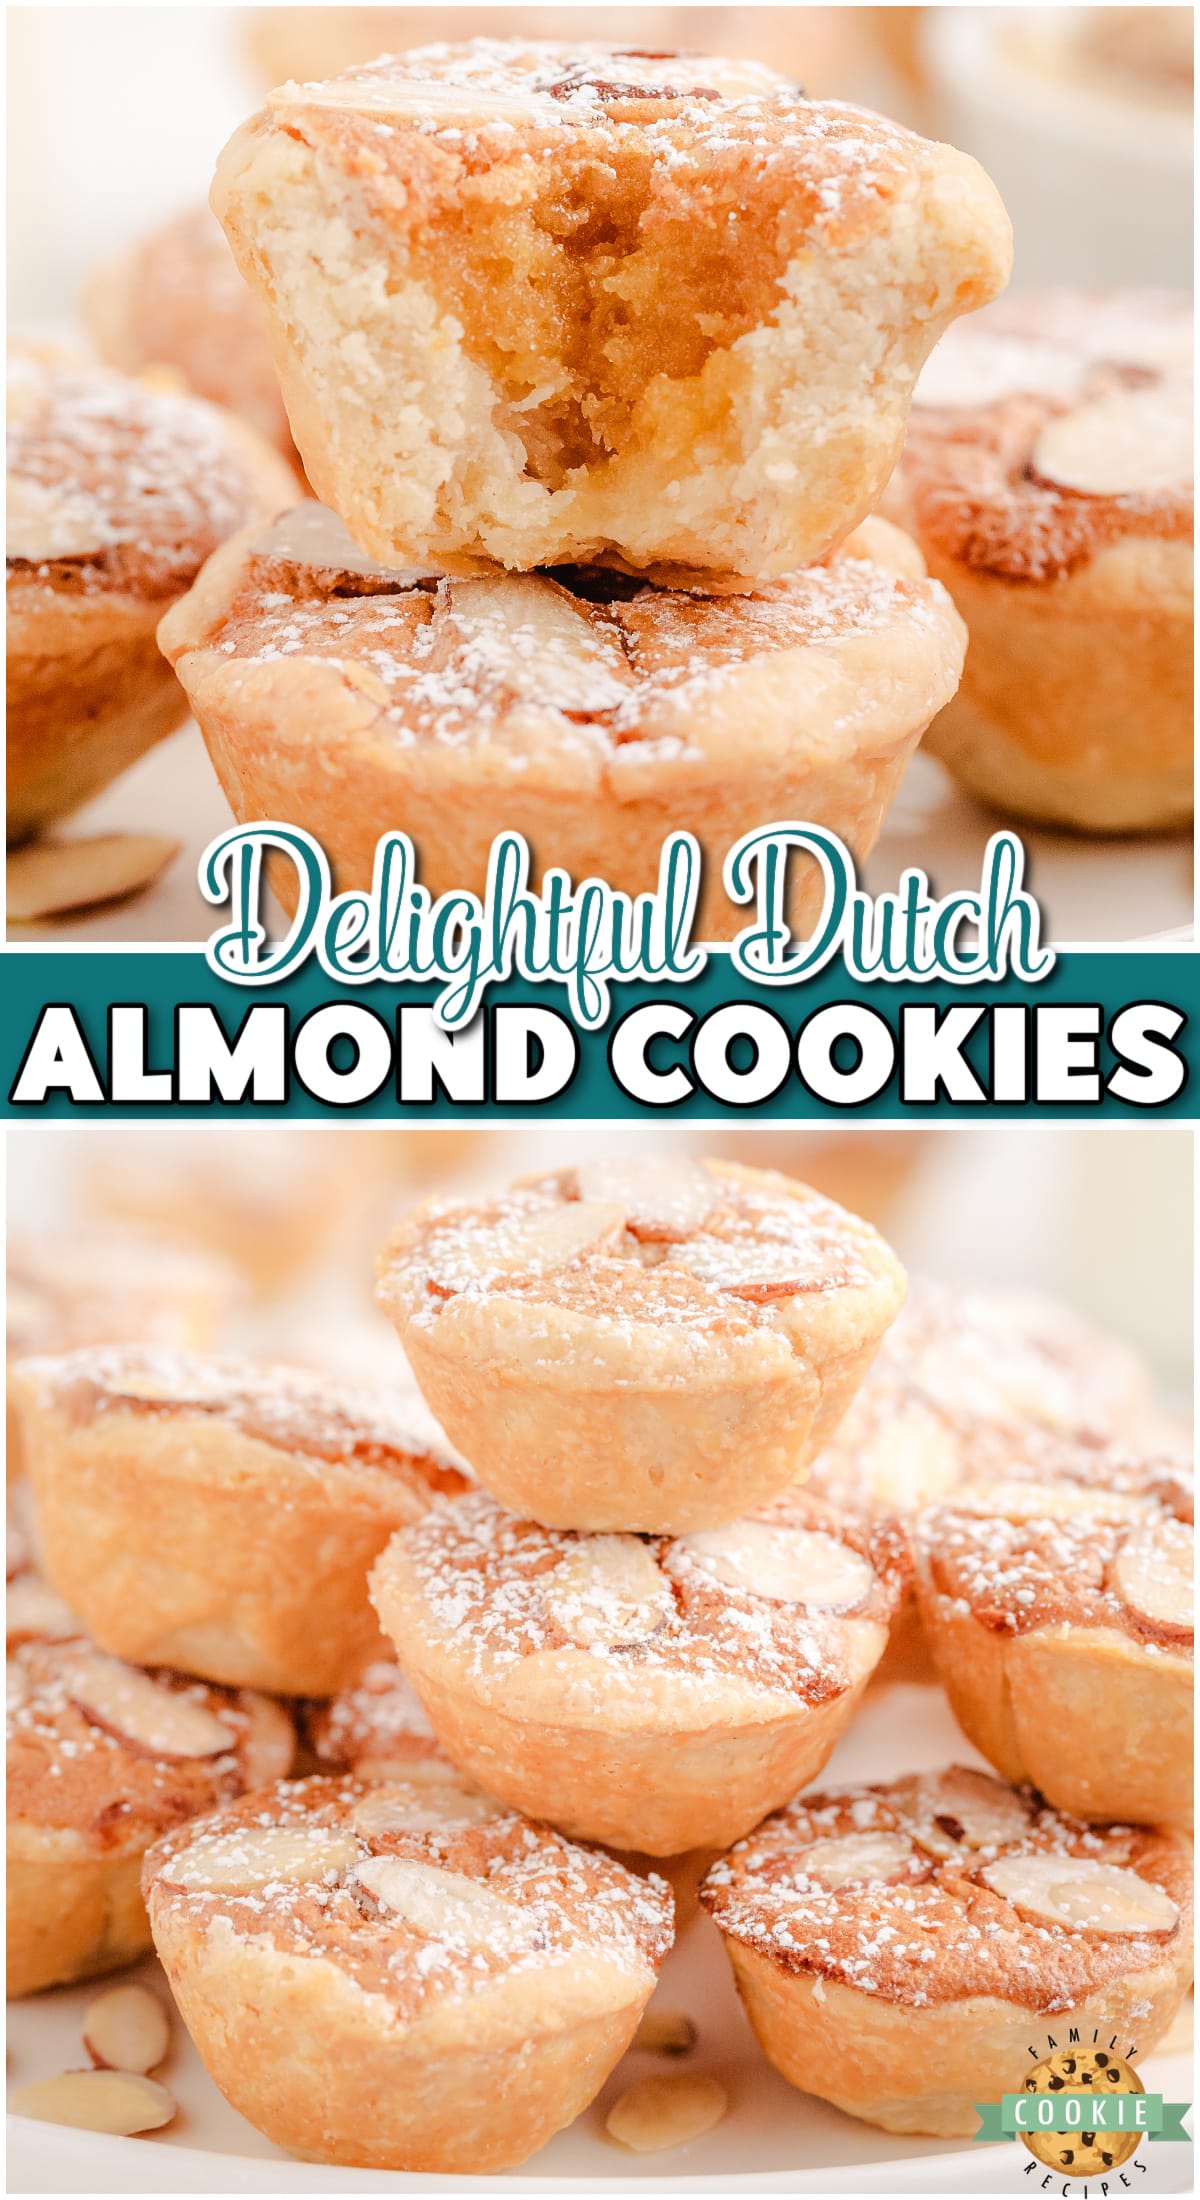 Dutch Almond Cookie Cups are buttery cream cheese cookies with a sweet almond filling! The almond cookies have a rich, nutty flavor and a soft, chewy texture that is sure to please!